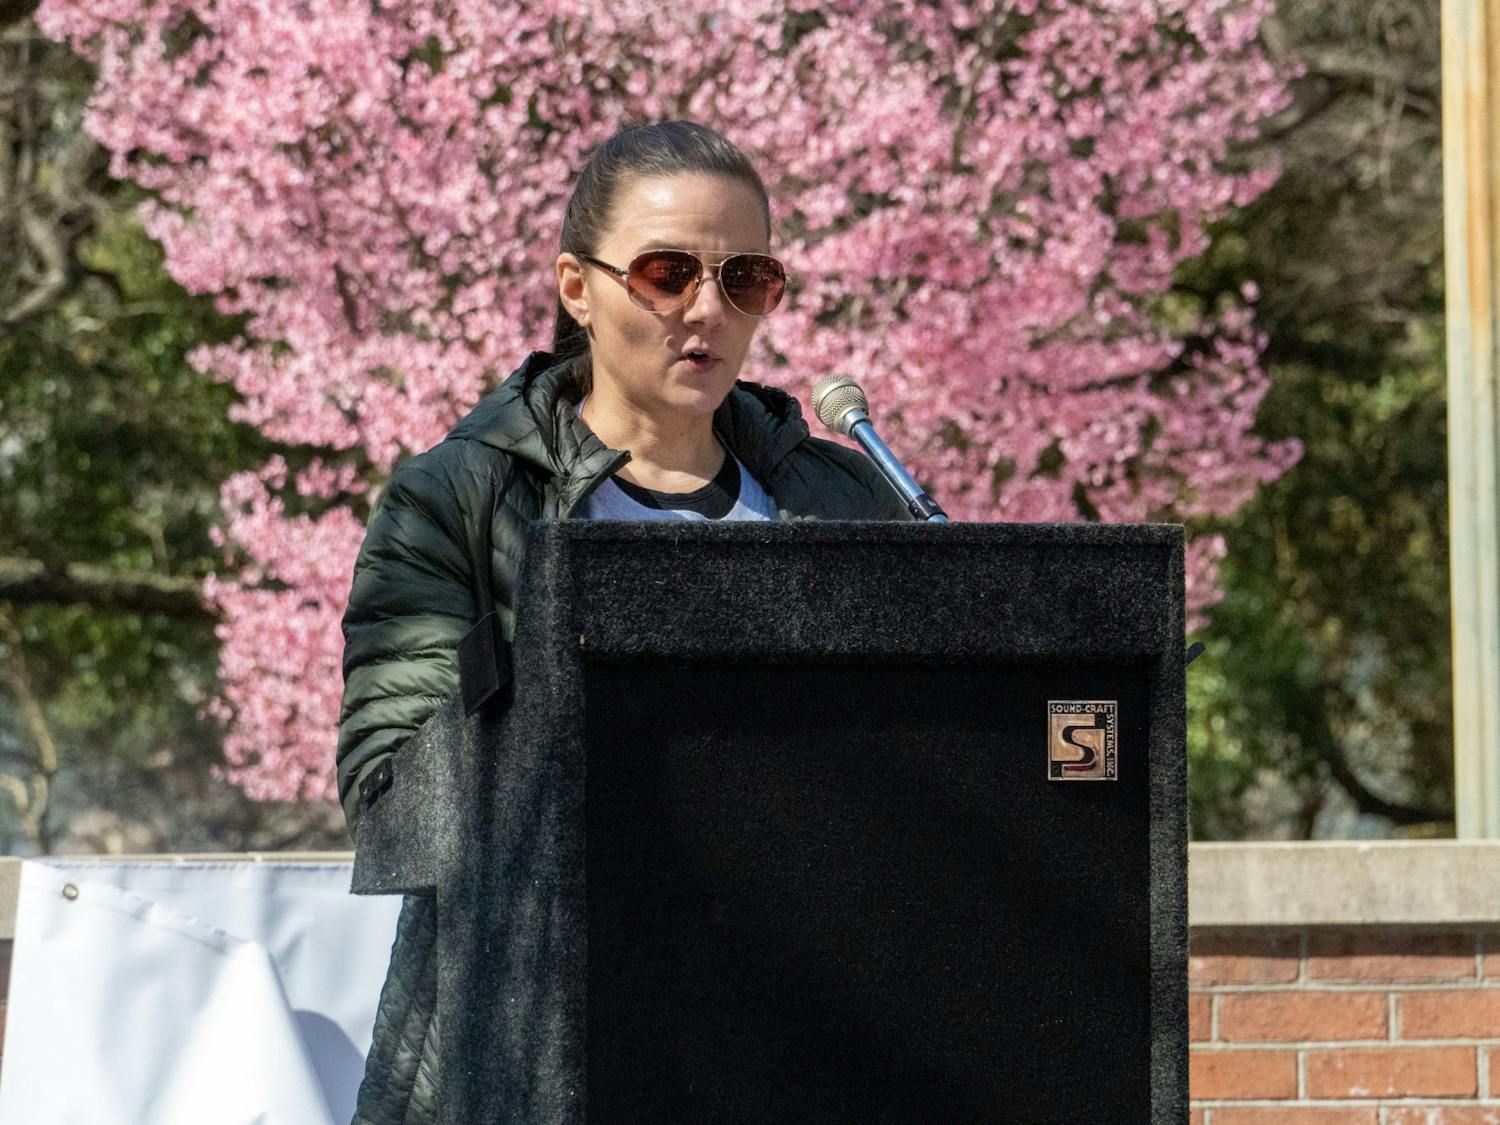 Special guest speaker, psychologist Nicole Matros, gives advice on dealing with loved ones suffering from eating disorders during NEDA Walk charity event on Feb. 26, 2022.The NEDA Walk took place as a charity event raise support and money for those who effected by eating disorders.